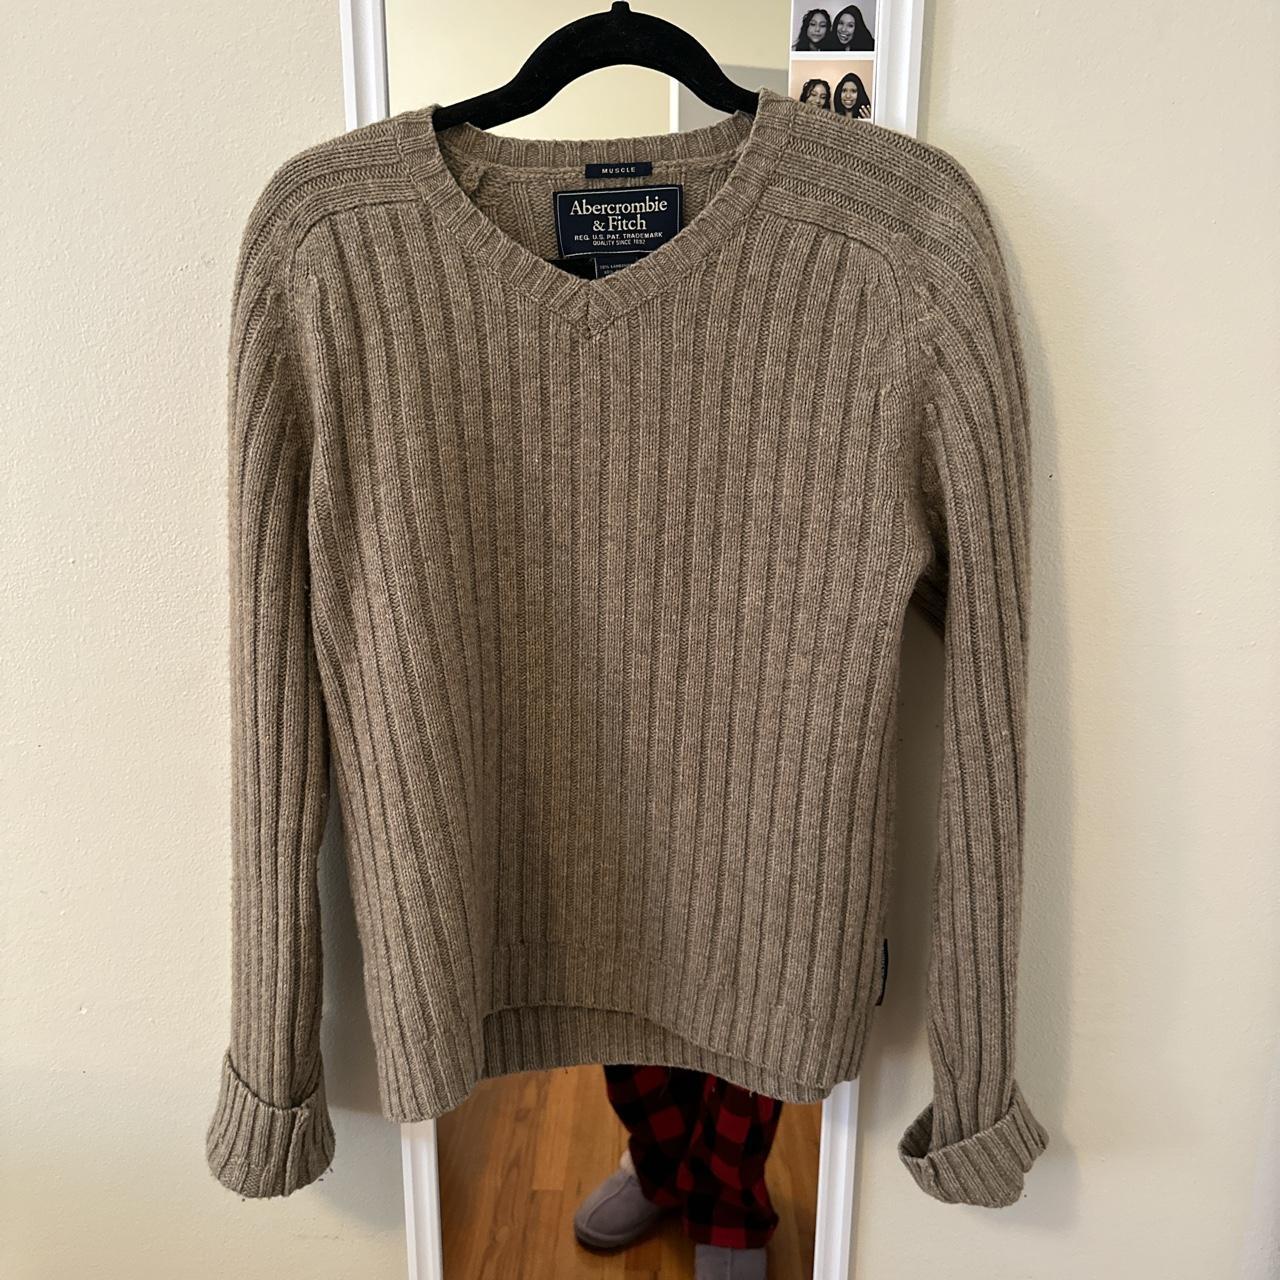 Abercrombie and Fitch sweater #sweater - Depop